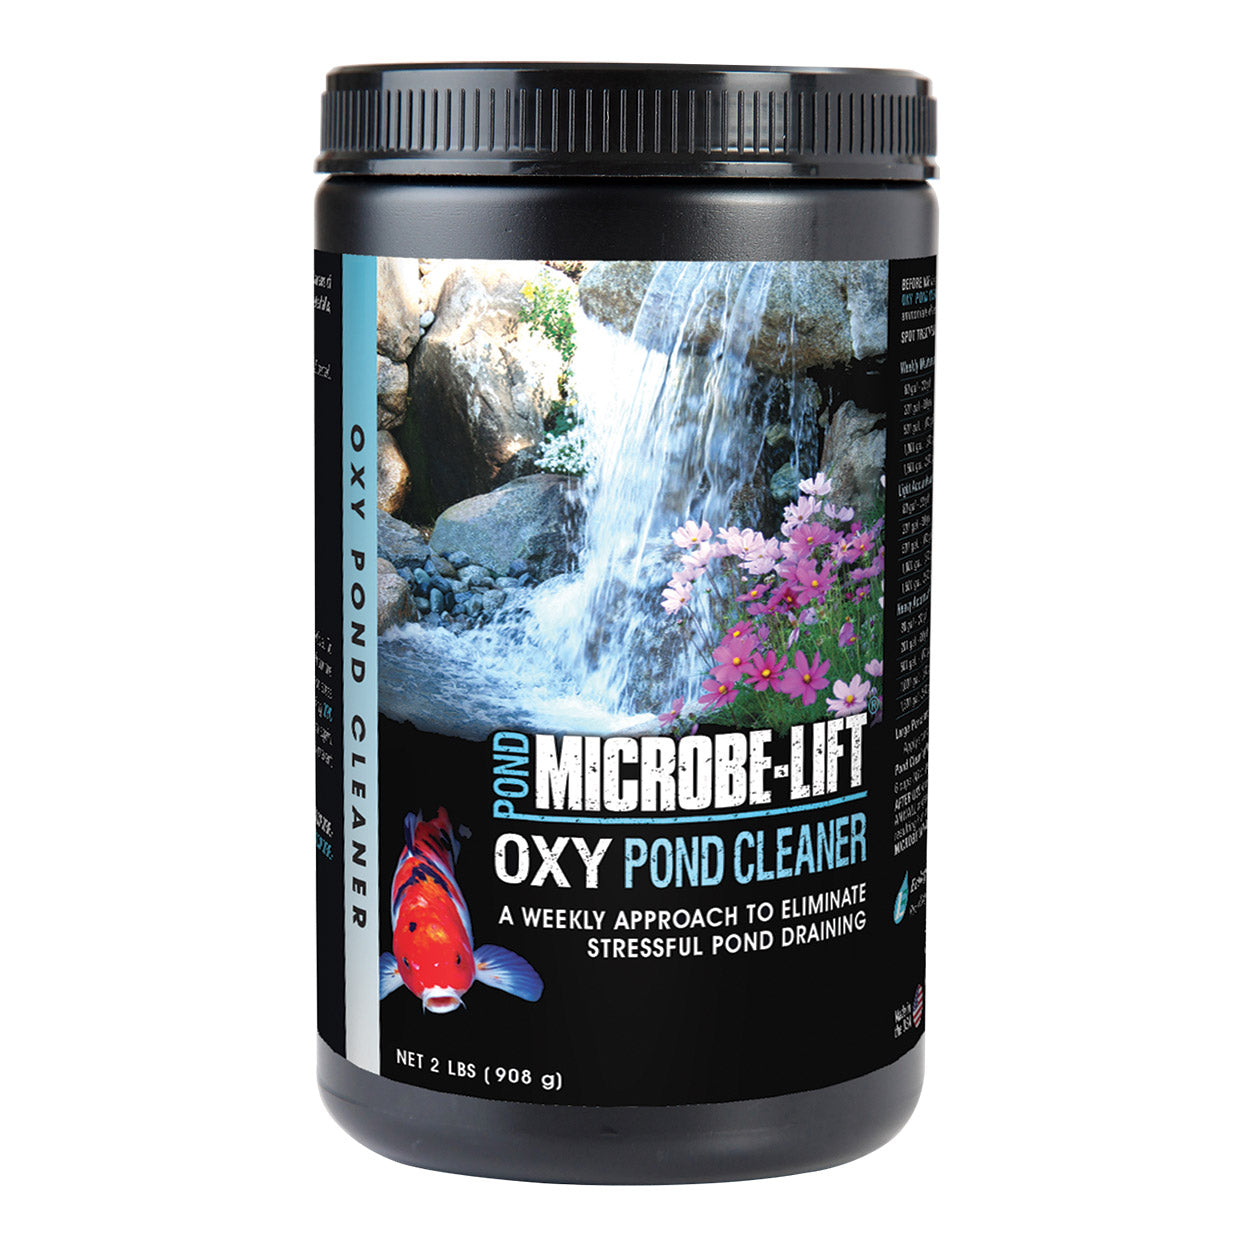 Microbe-Lift Oxy Pond Cleaner